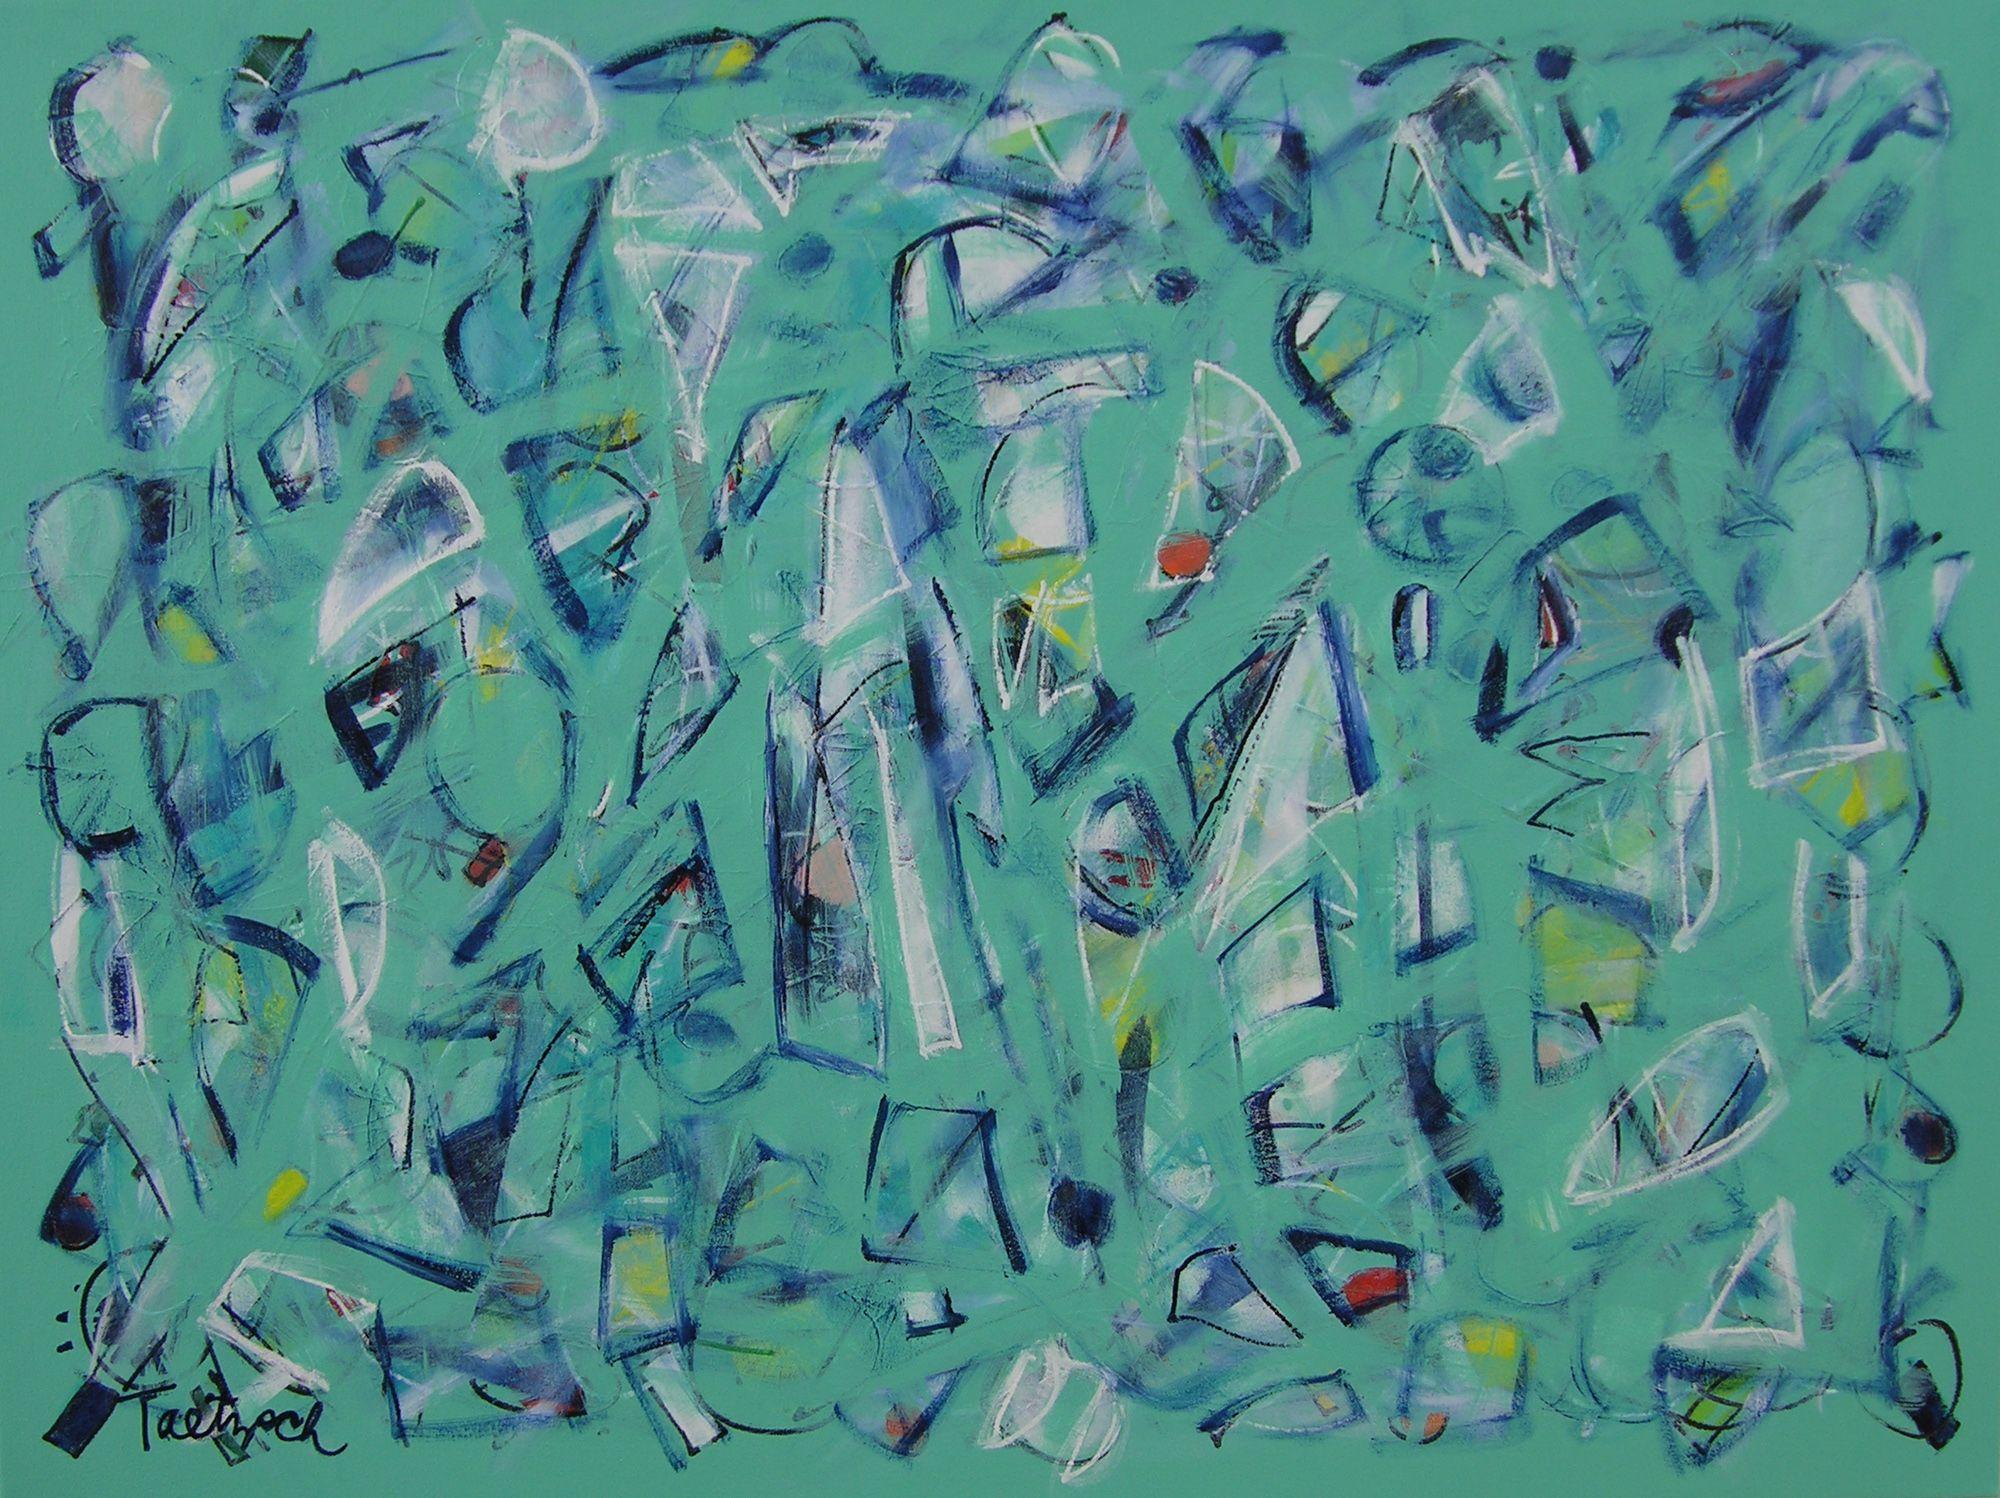 Bits And Pieces has bits of colors and shapes floating on the surface and hiding just beneath. Look into this cool aqua pool to find a lost object or memory.     40" x 30" x 1.5" original painting on stretched canvas, with the image continuing